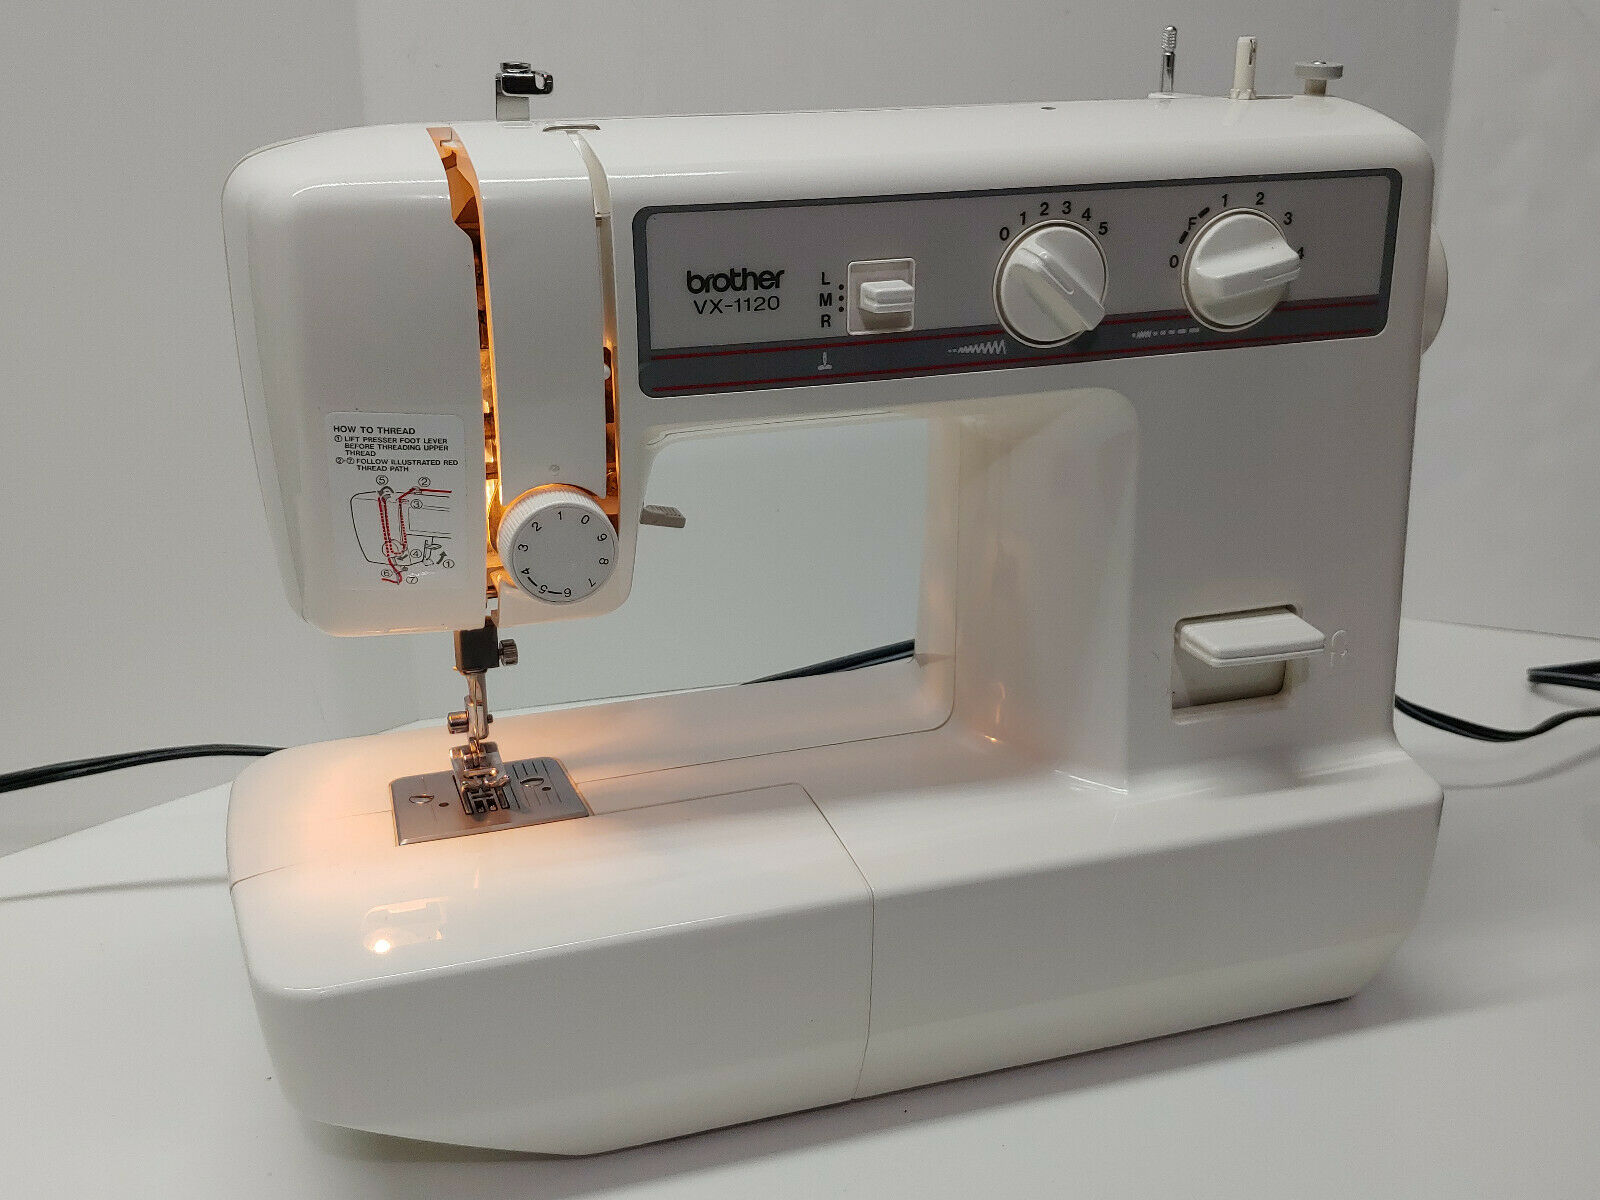 Brother VX-1120 sewing machine